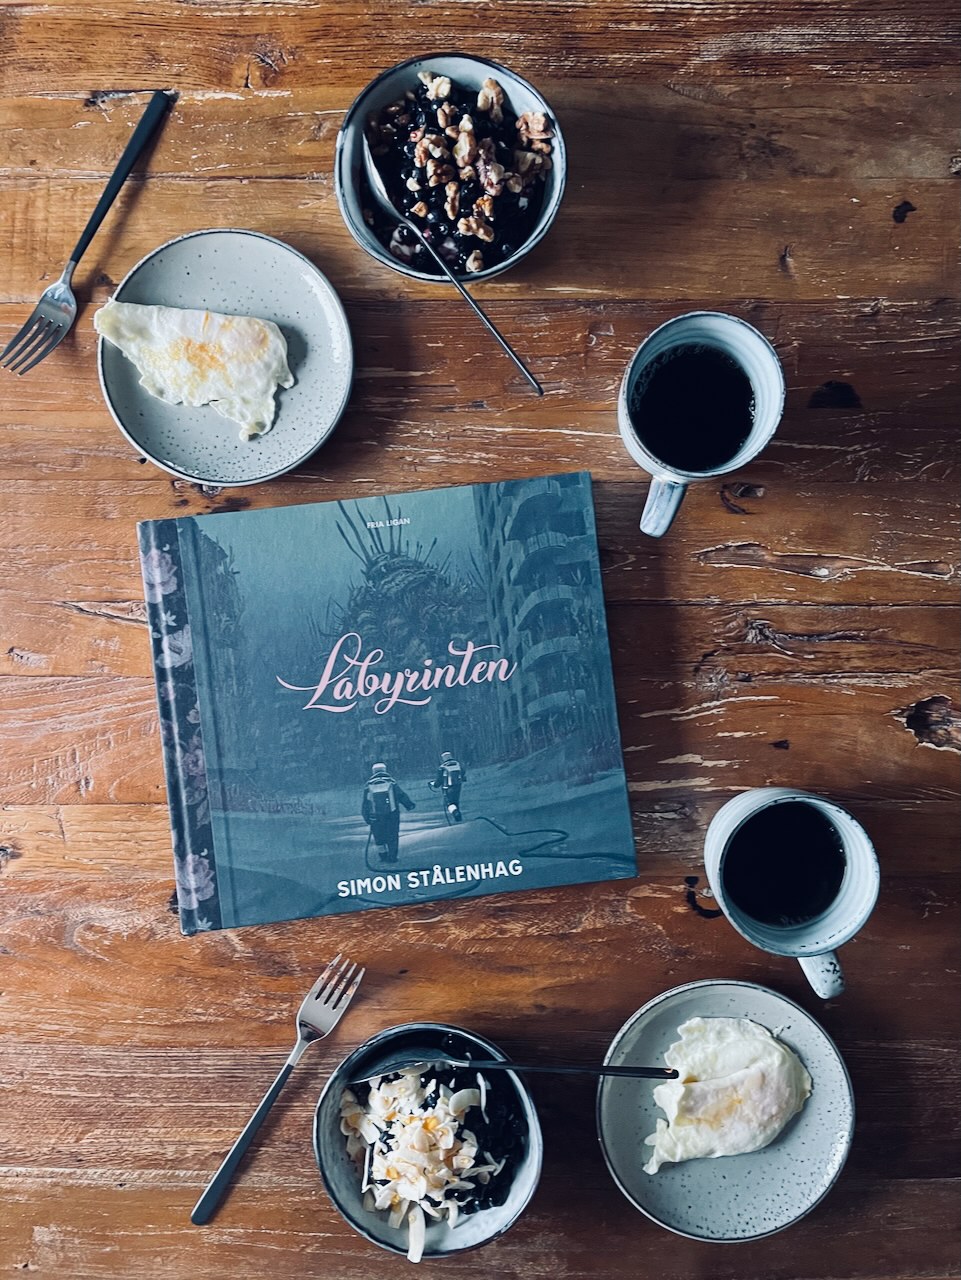 A breakfast table with eggs, coffee, and yogurt topped with blueberries. In the middle of the table is a book by Simon Stålenhag: The Labyrinth.